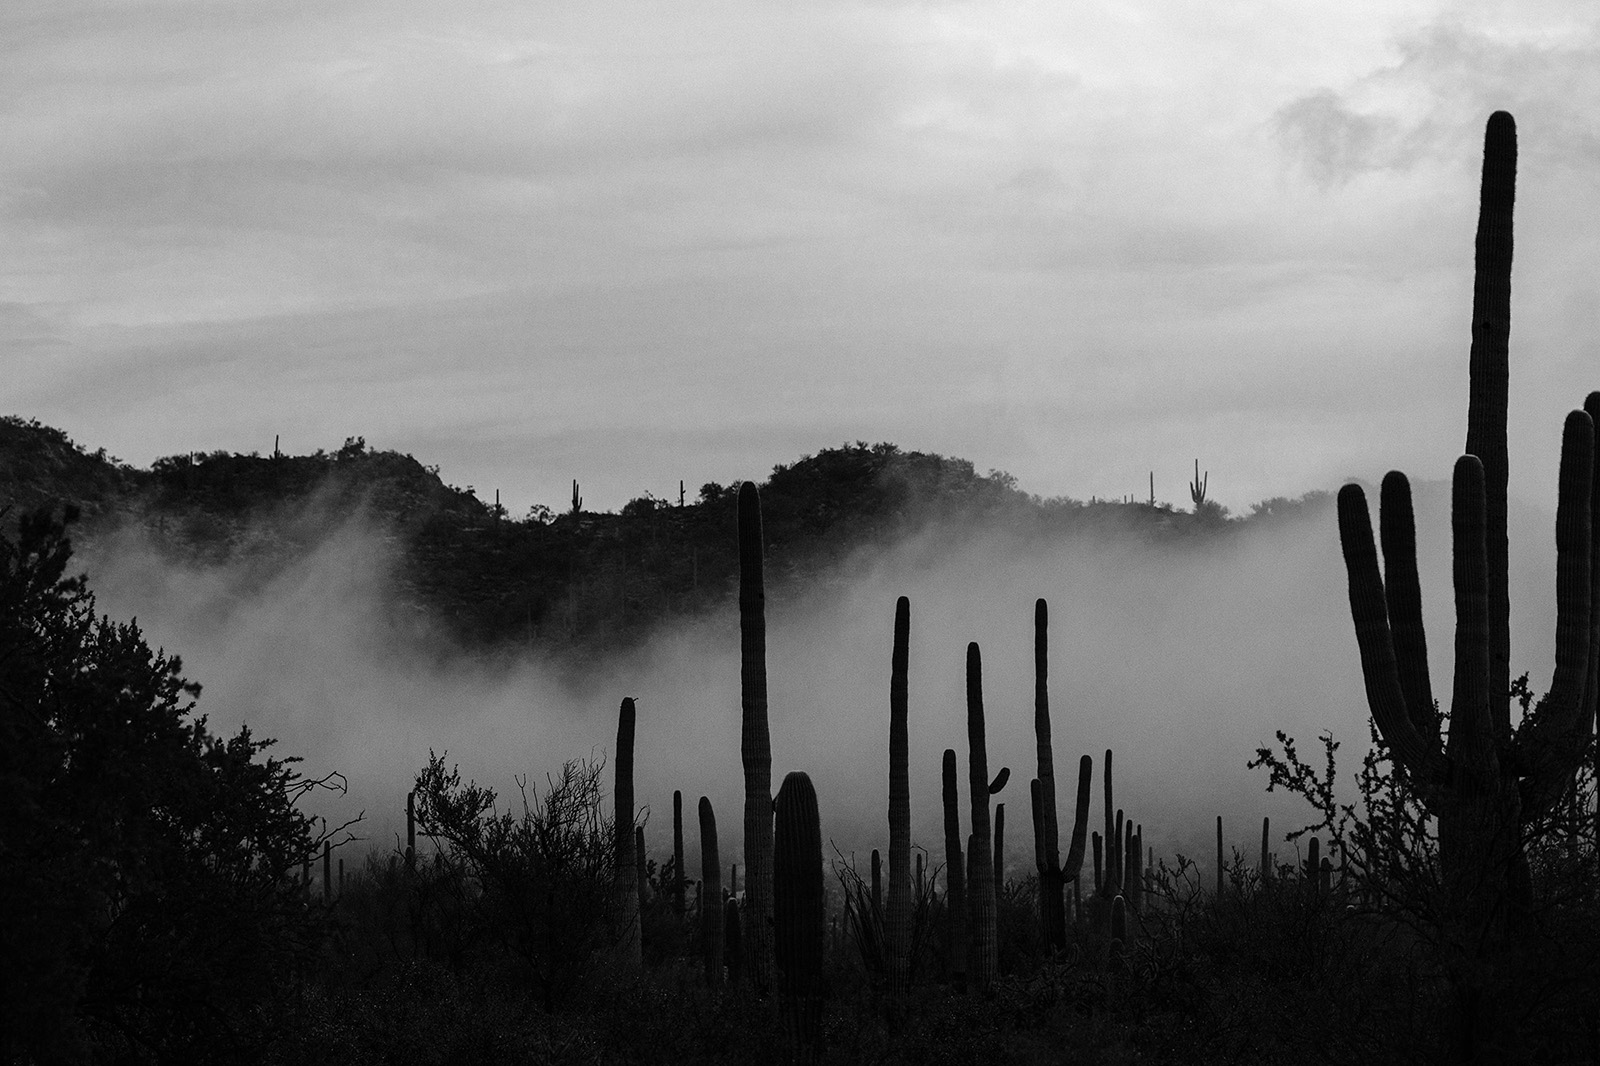 Photo by Diana Lustig  |  Fog moves through Saguaro cacti after a storm in Tucson, Arizona. 